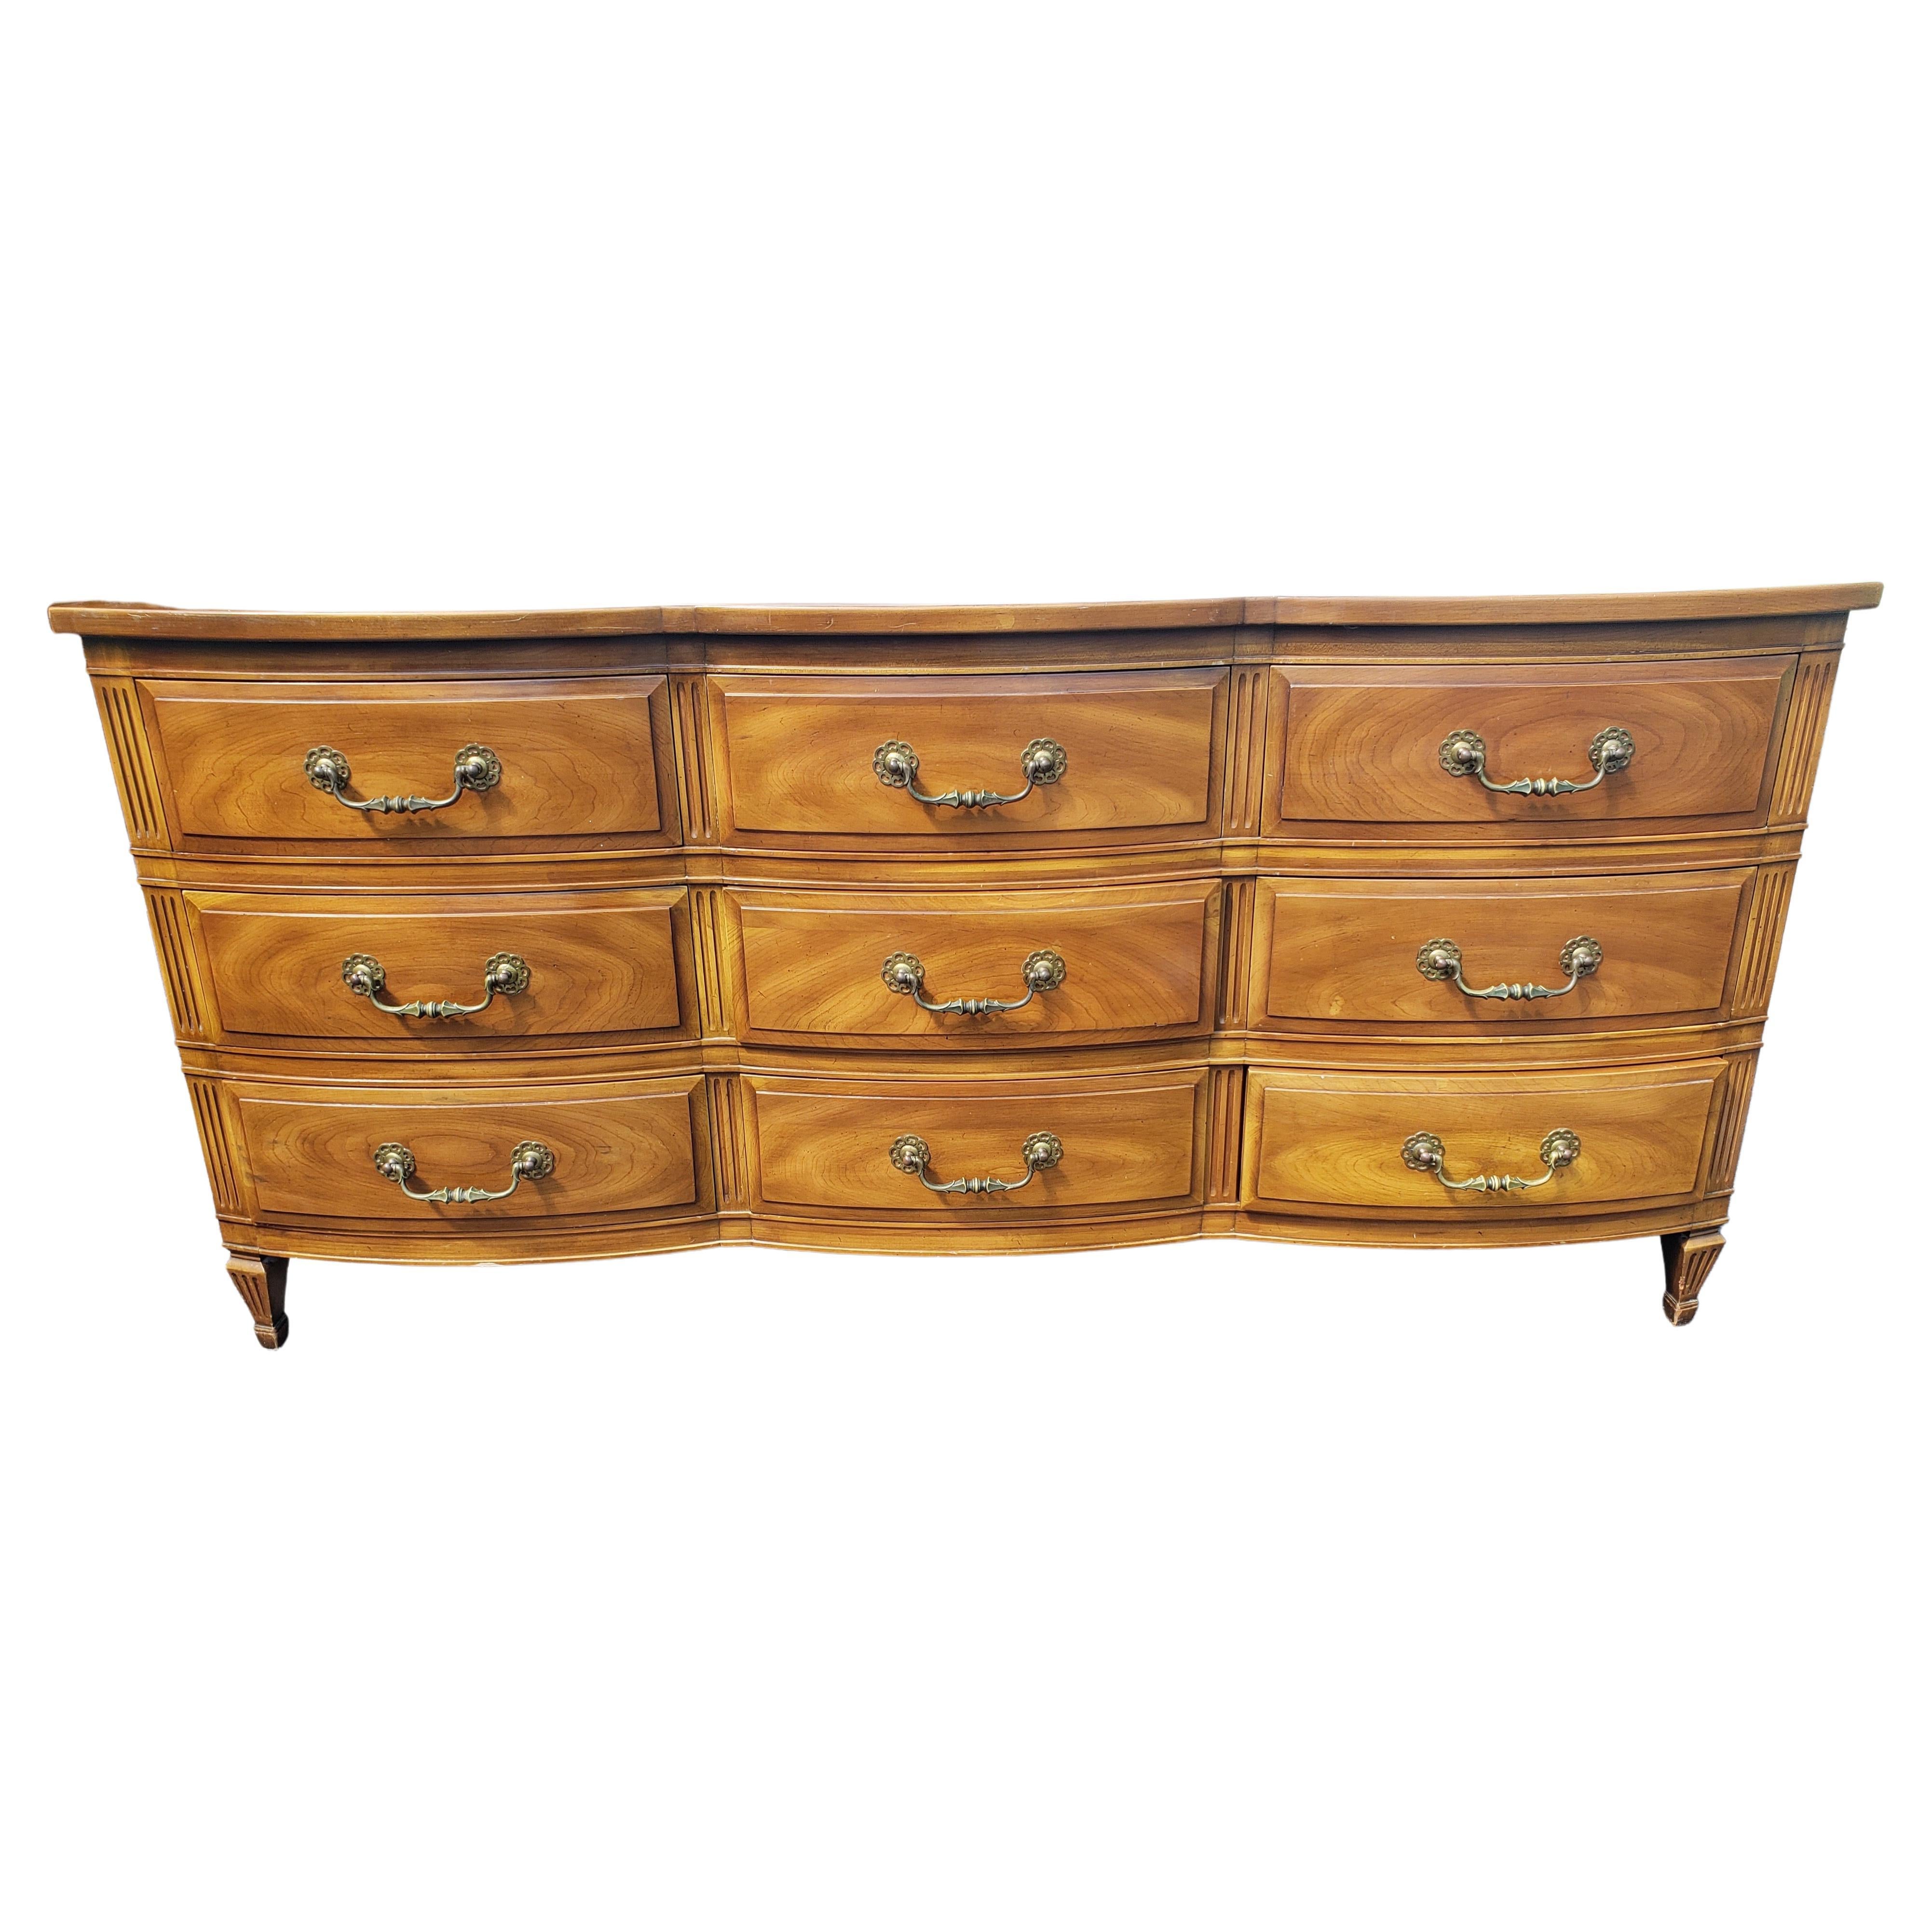 John Widdicomb French Country Serpentine Dresser with Glass Top, circa 1950s In Good Condition For Sale In Germantown, MD